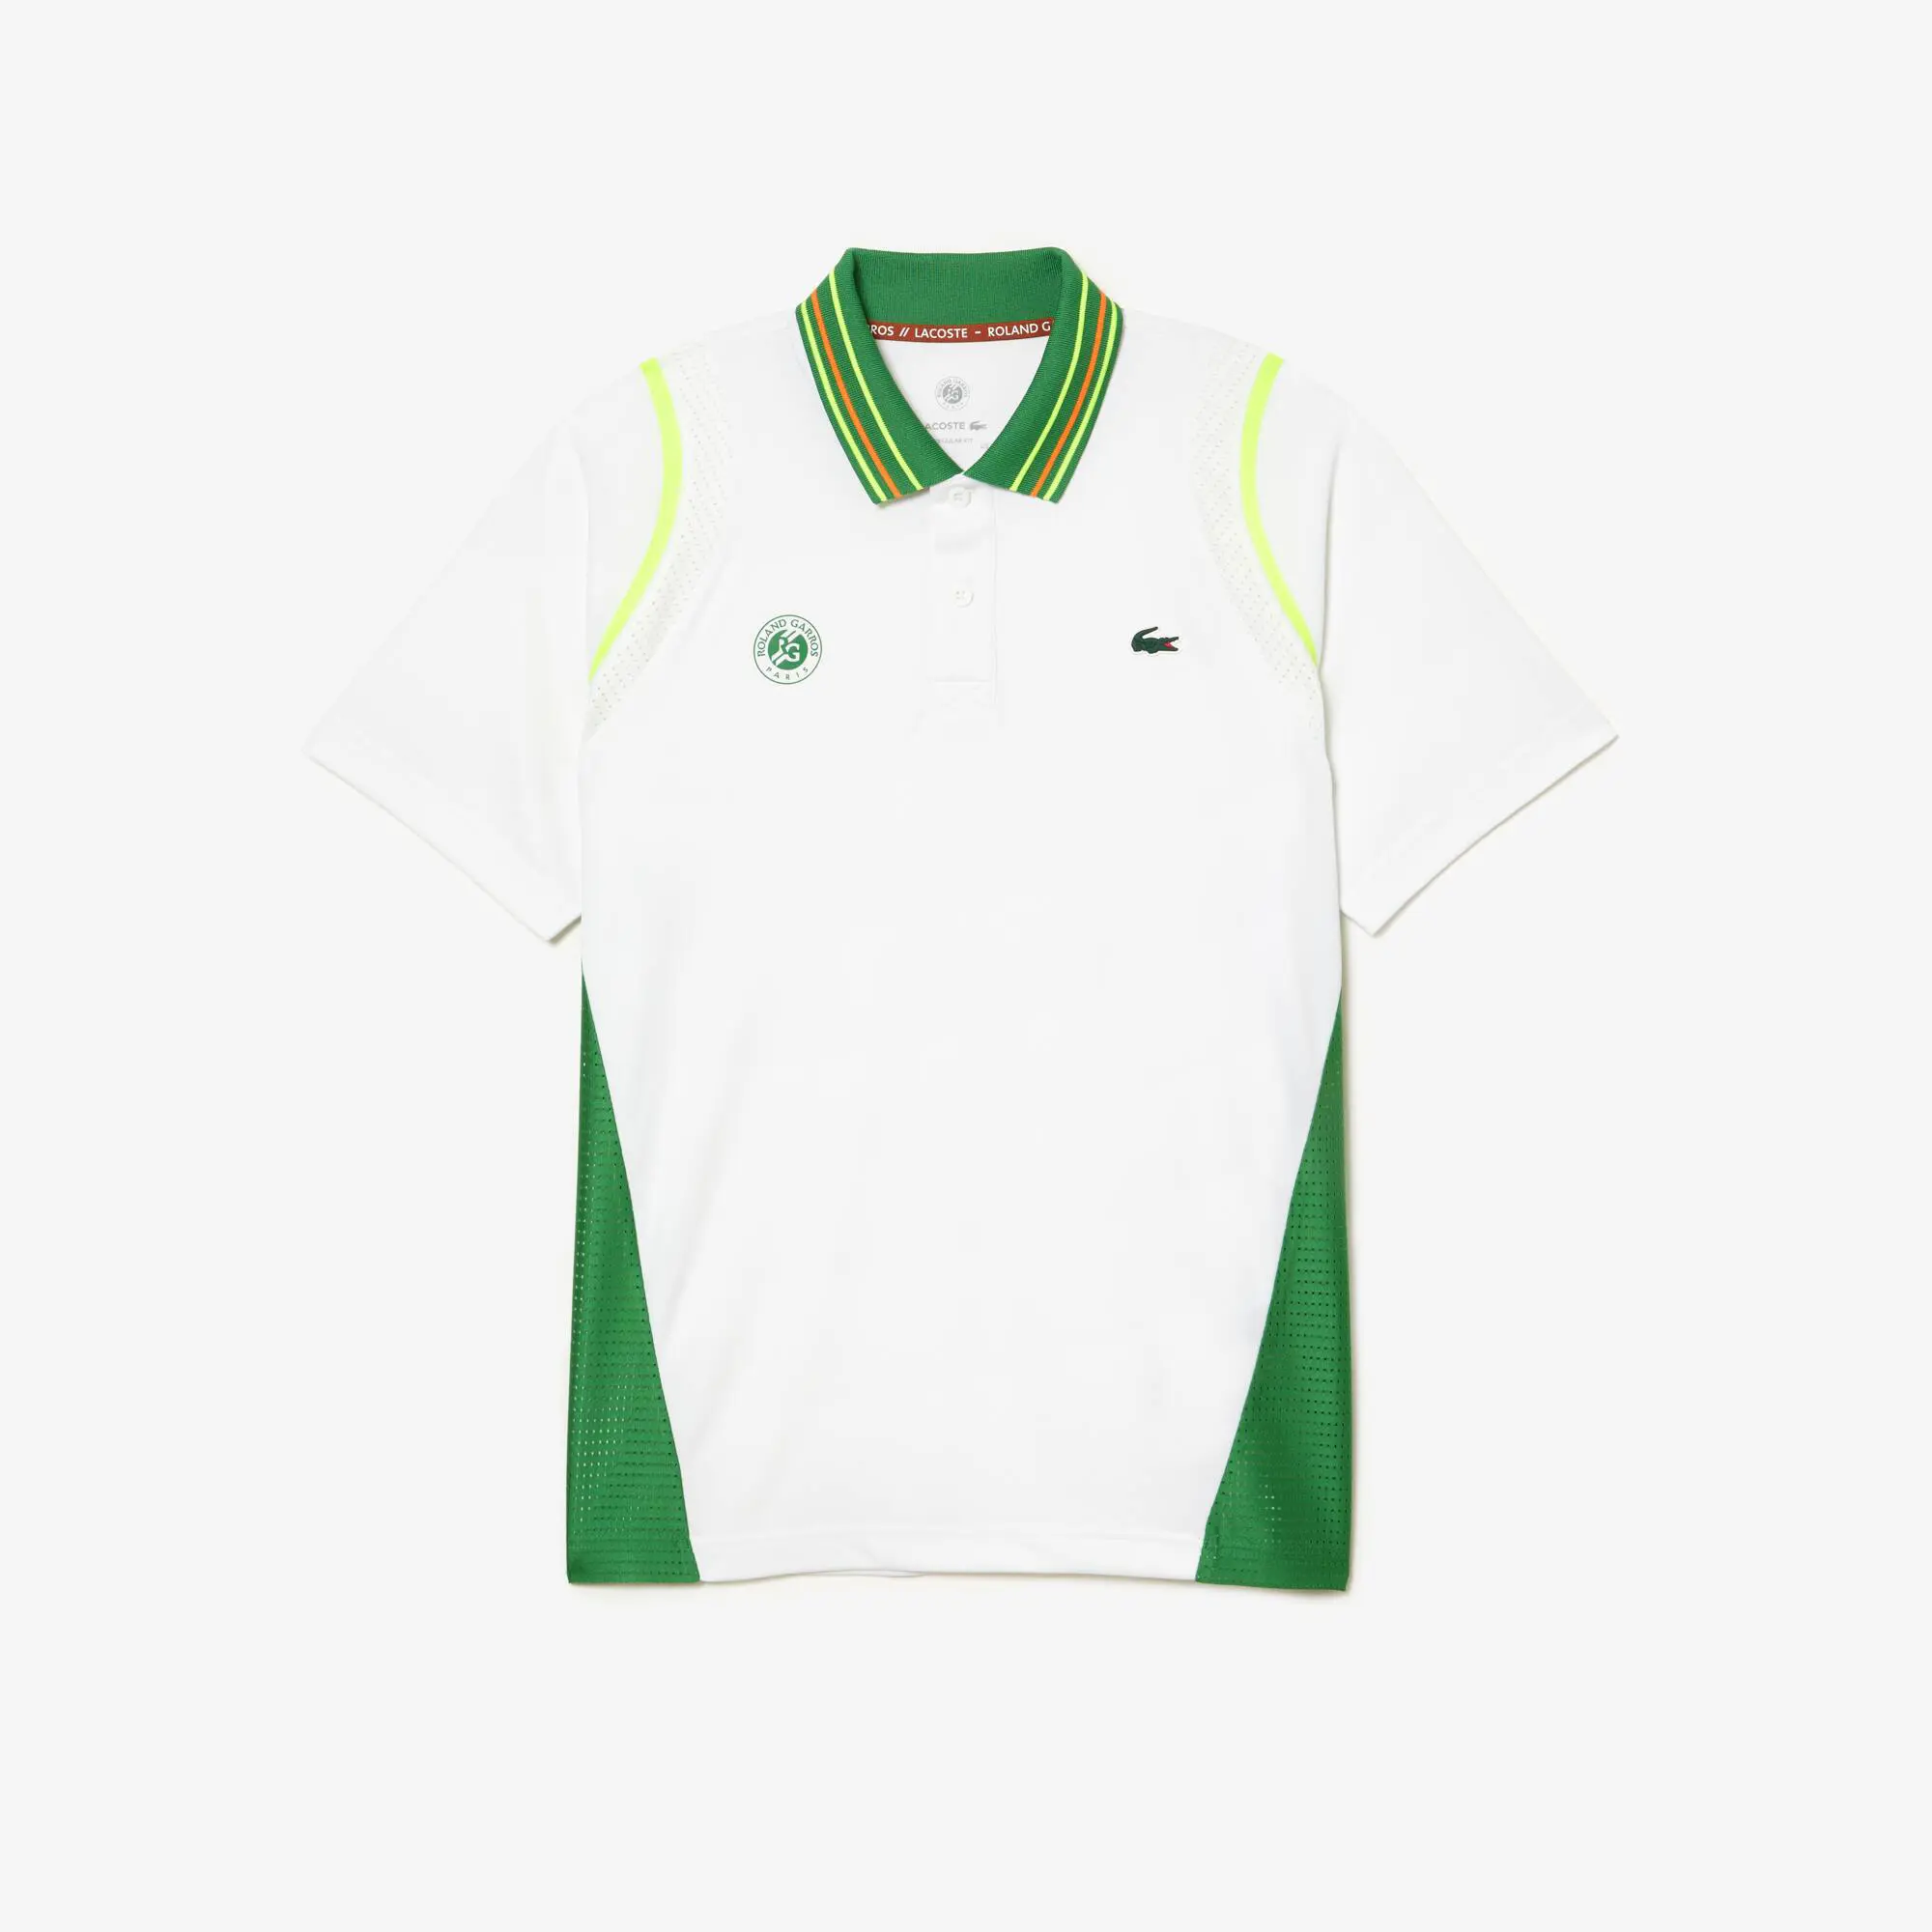 Lacoste Men’s Lacoste Sport Roland Garros Edition Ultra-Dry Two Tone Polo Shirt. 2